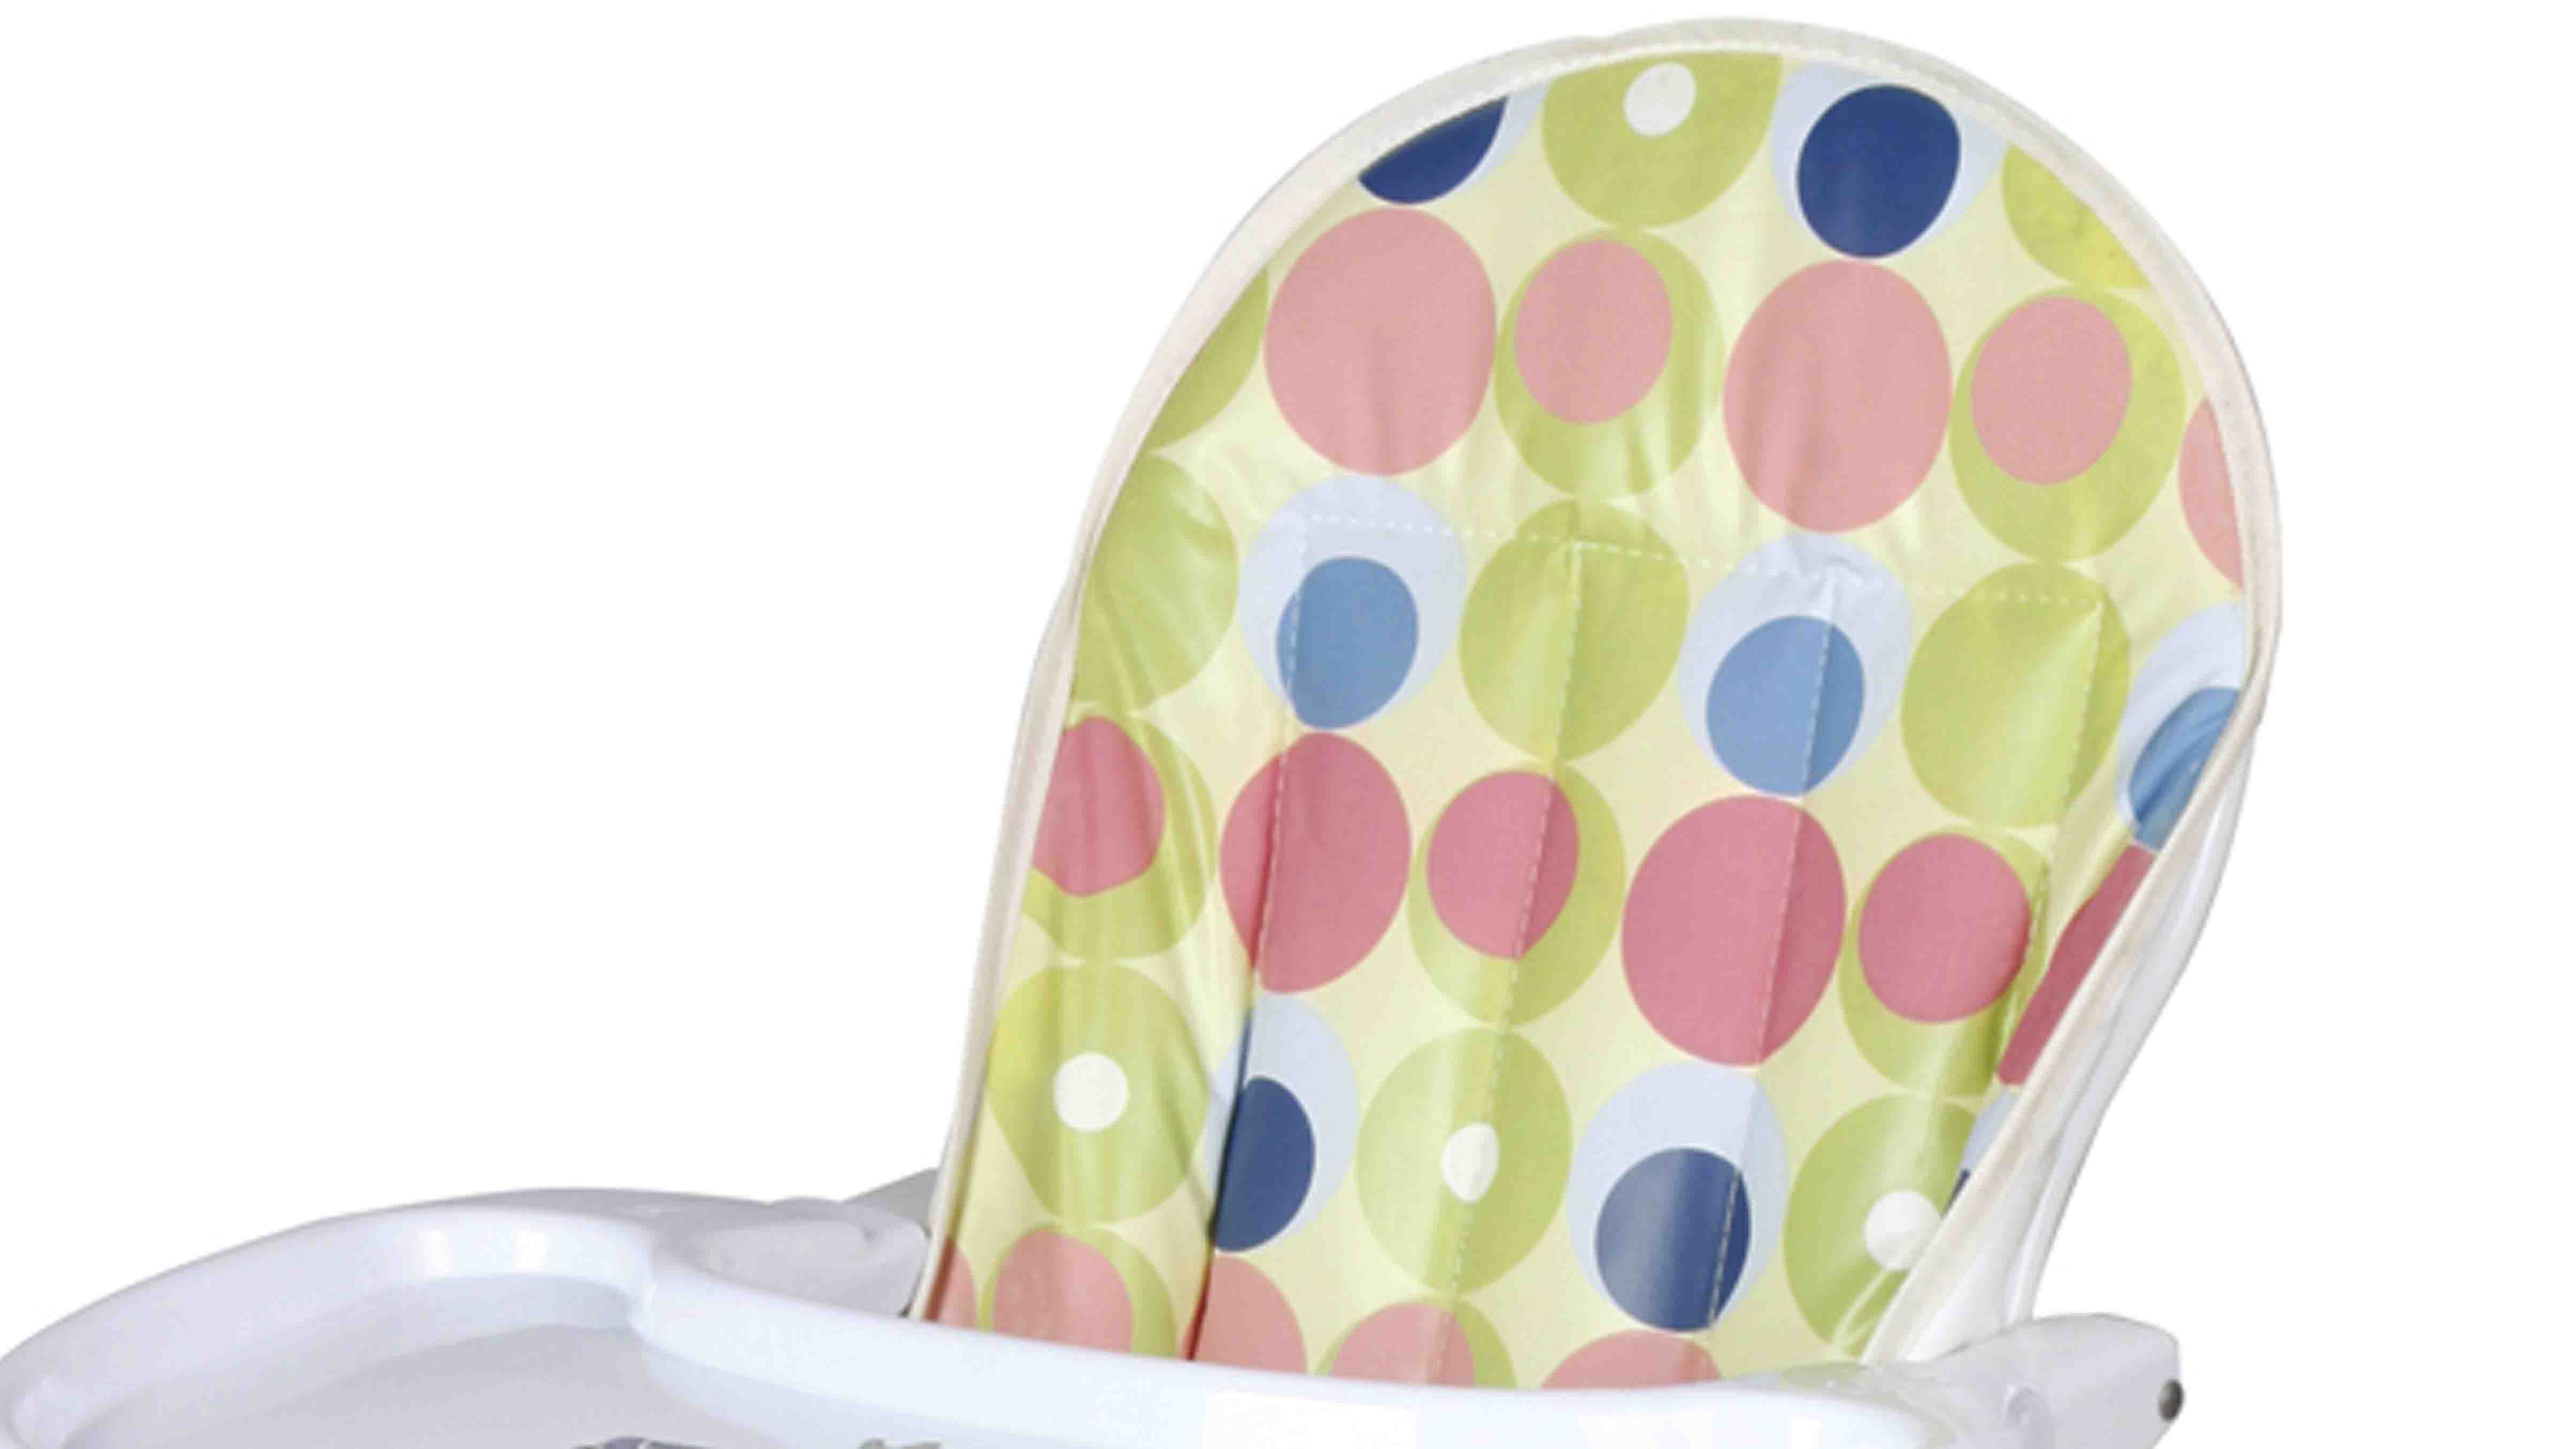 portable baby feeding high chair directly sale for infant